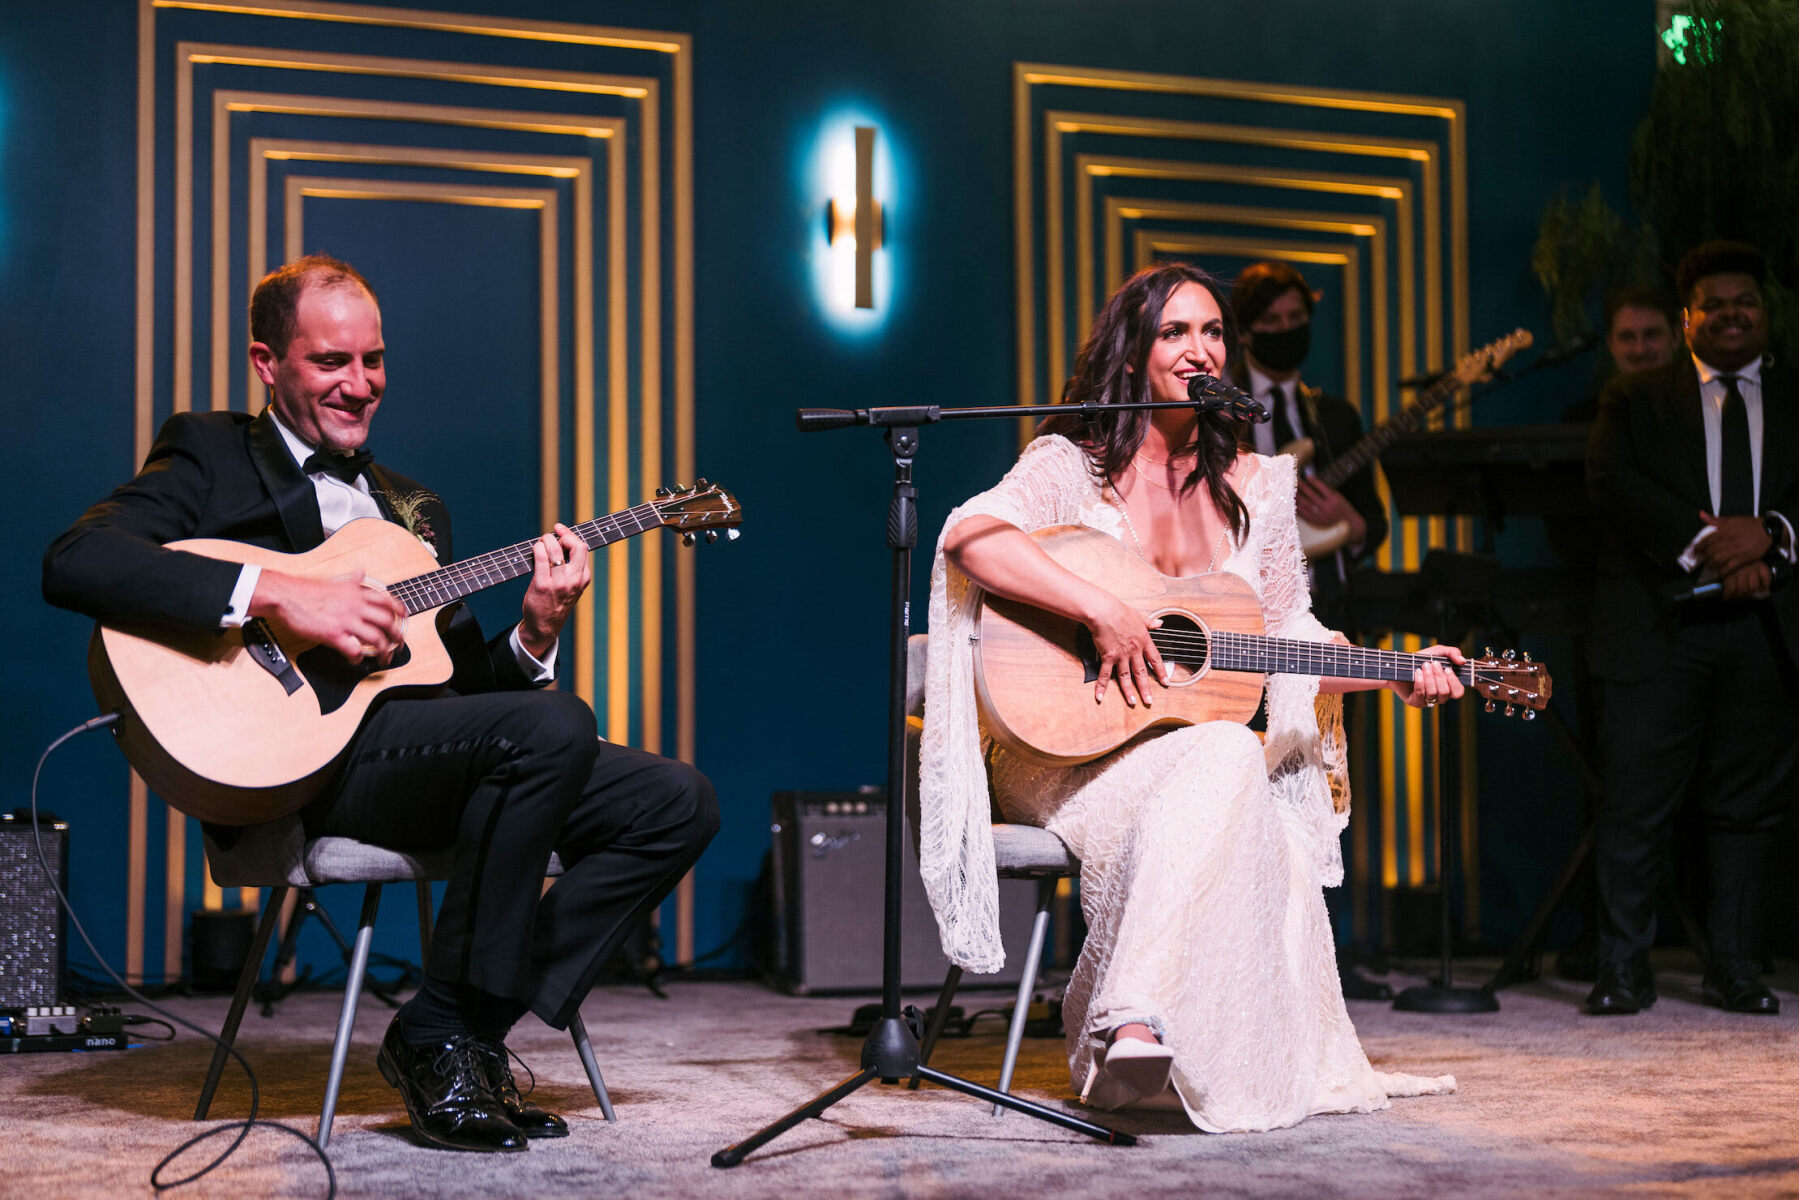 Instead of a first dance, a couple performed a first song at their glam enchanted wedding.